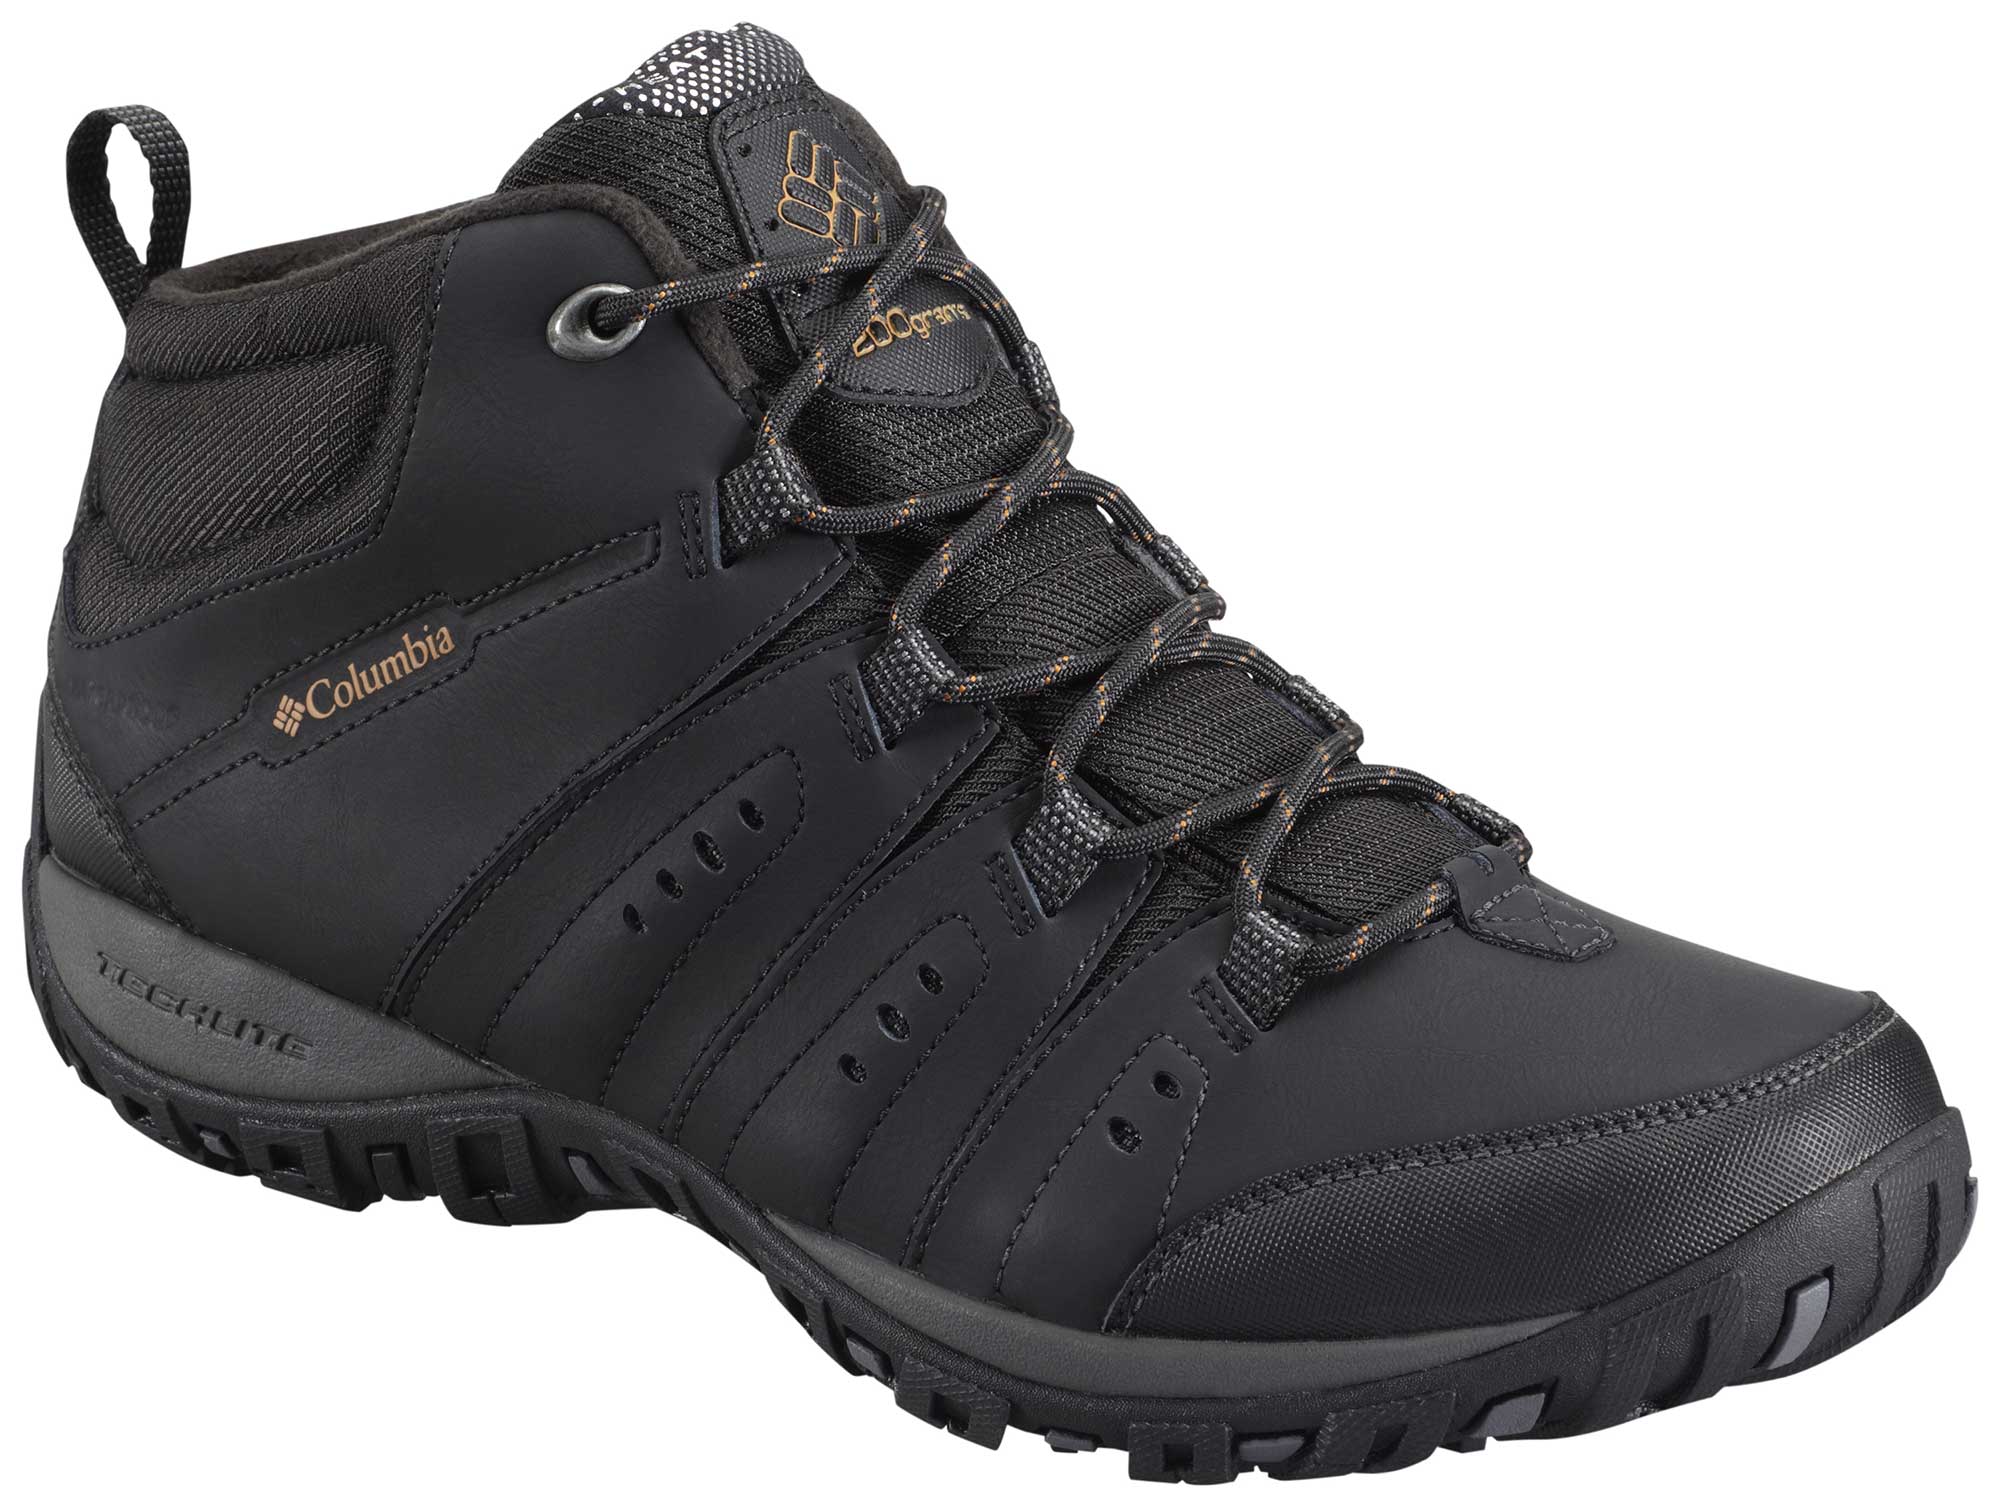 Men's Hiking/Casual Shoes